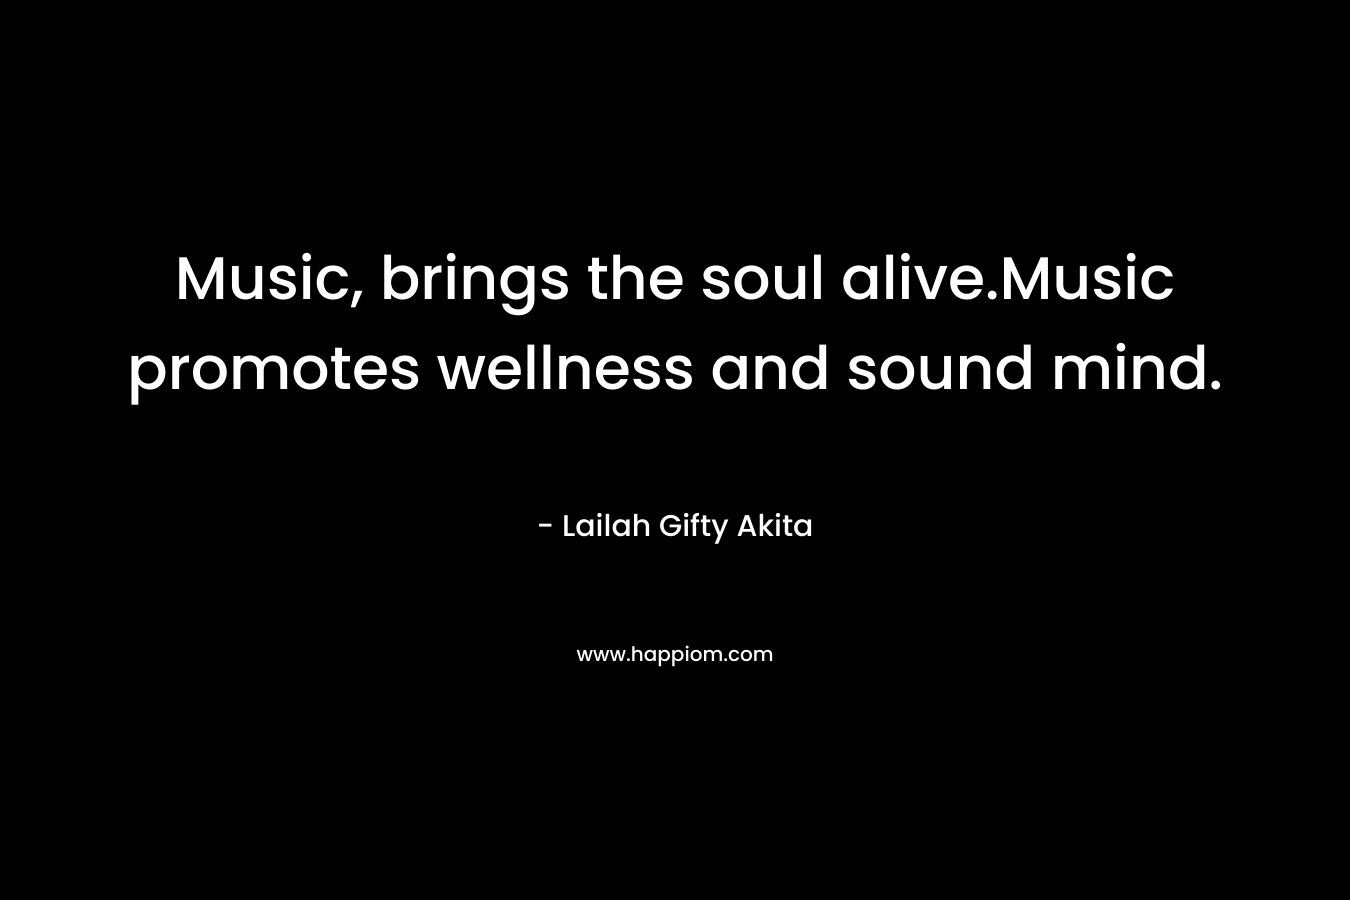 Music, brings the soul alive.Music promotes wellness and sound mind.